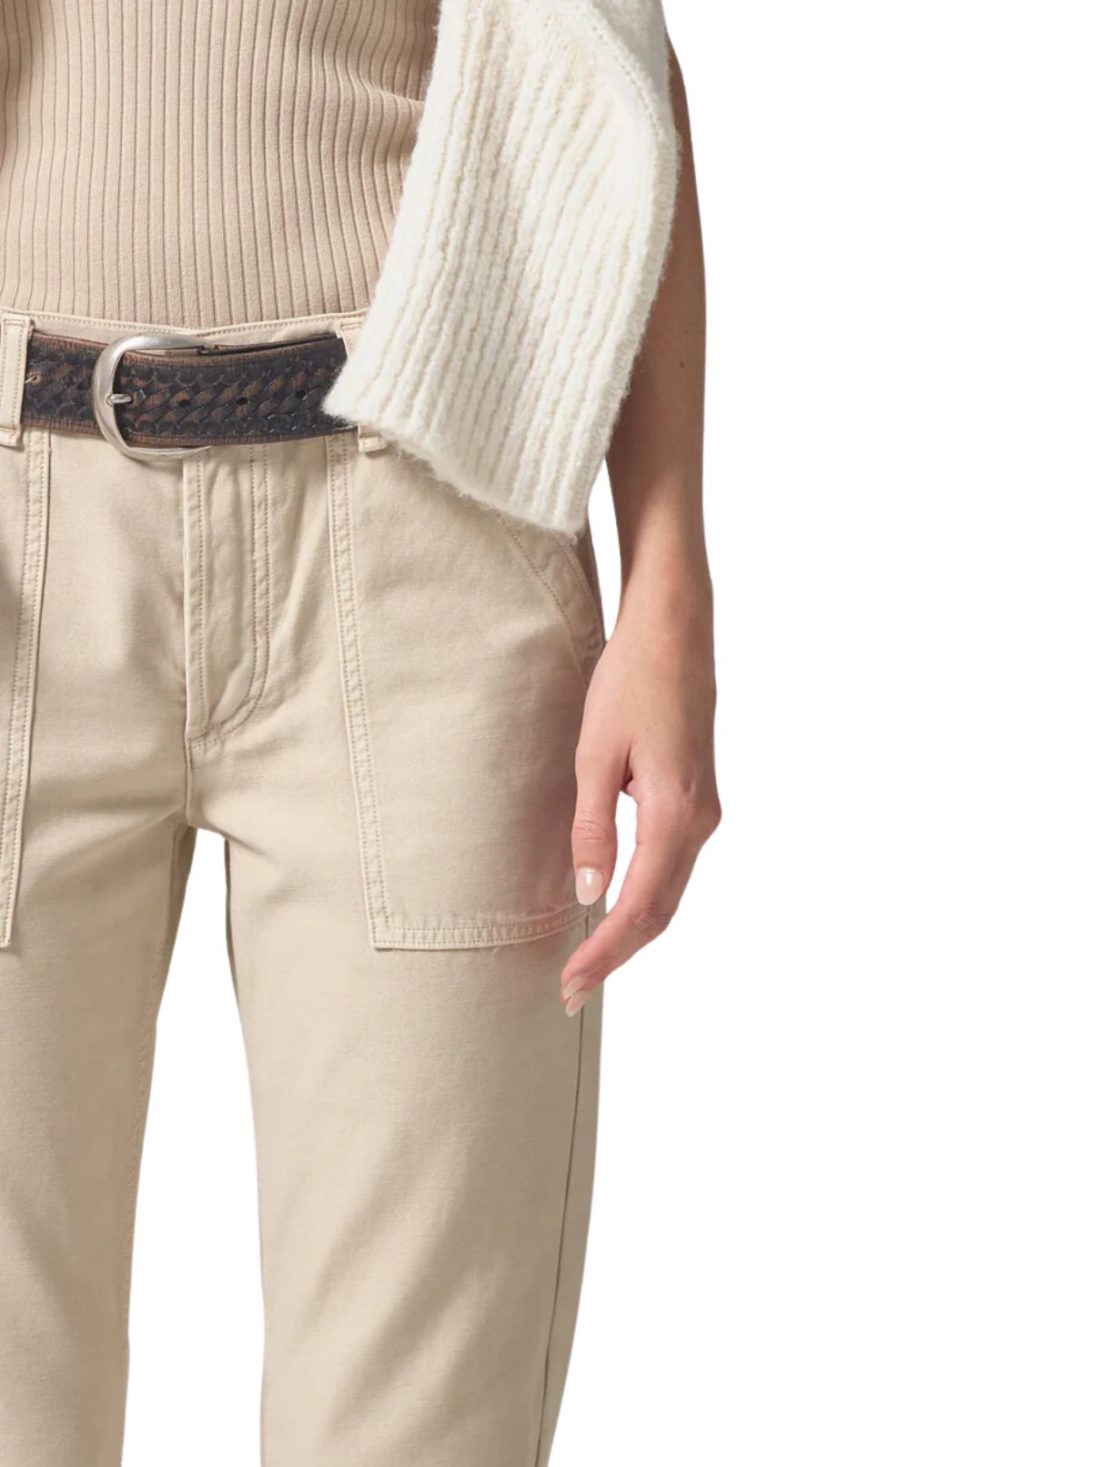 citizens of humanity leah sateen cargo pant in taos sand